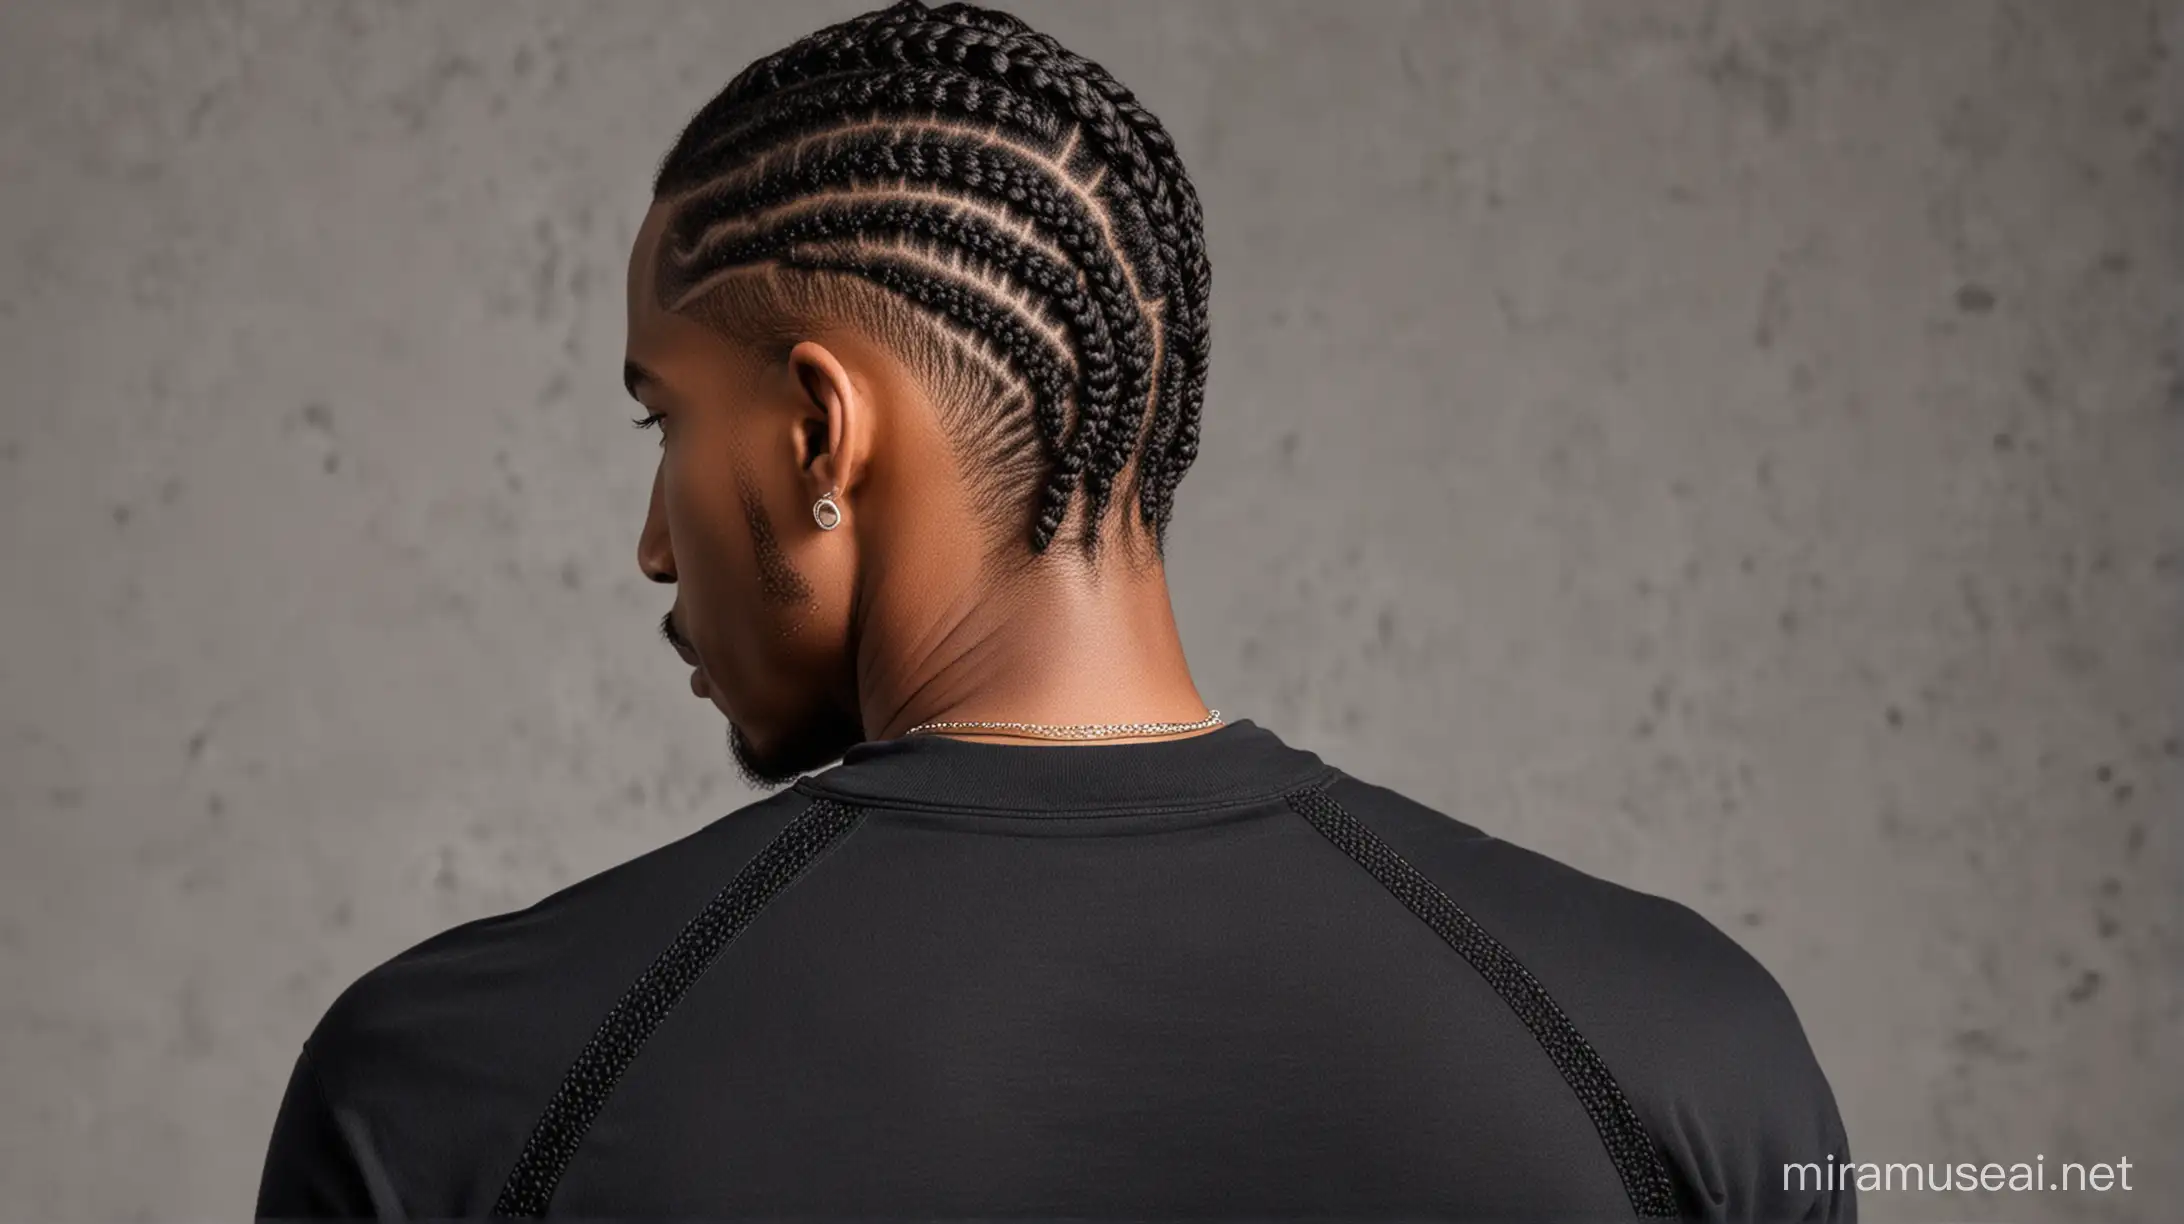 black man model with cornrow braids with his back to the camera with a plain black crewneck on